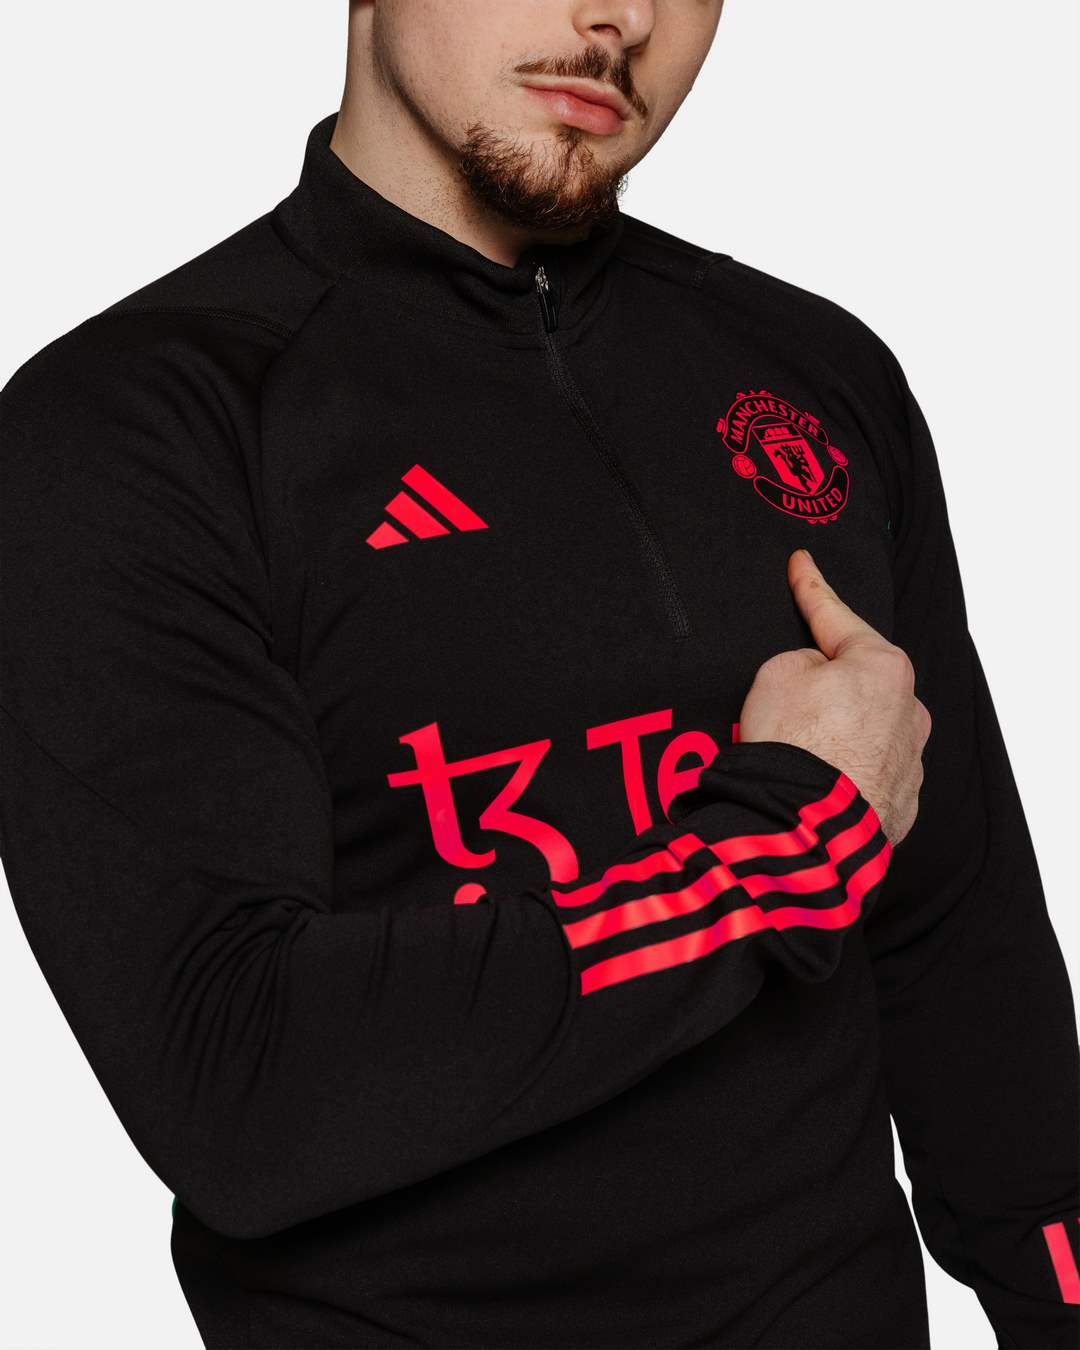 Manchester United 2023/2024 training top - Black/Red/Green